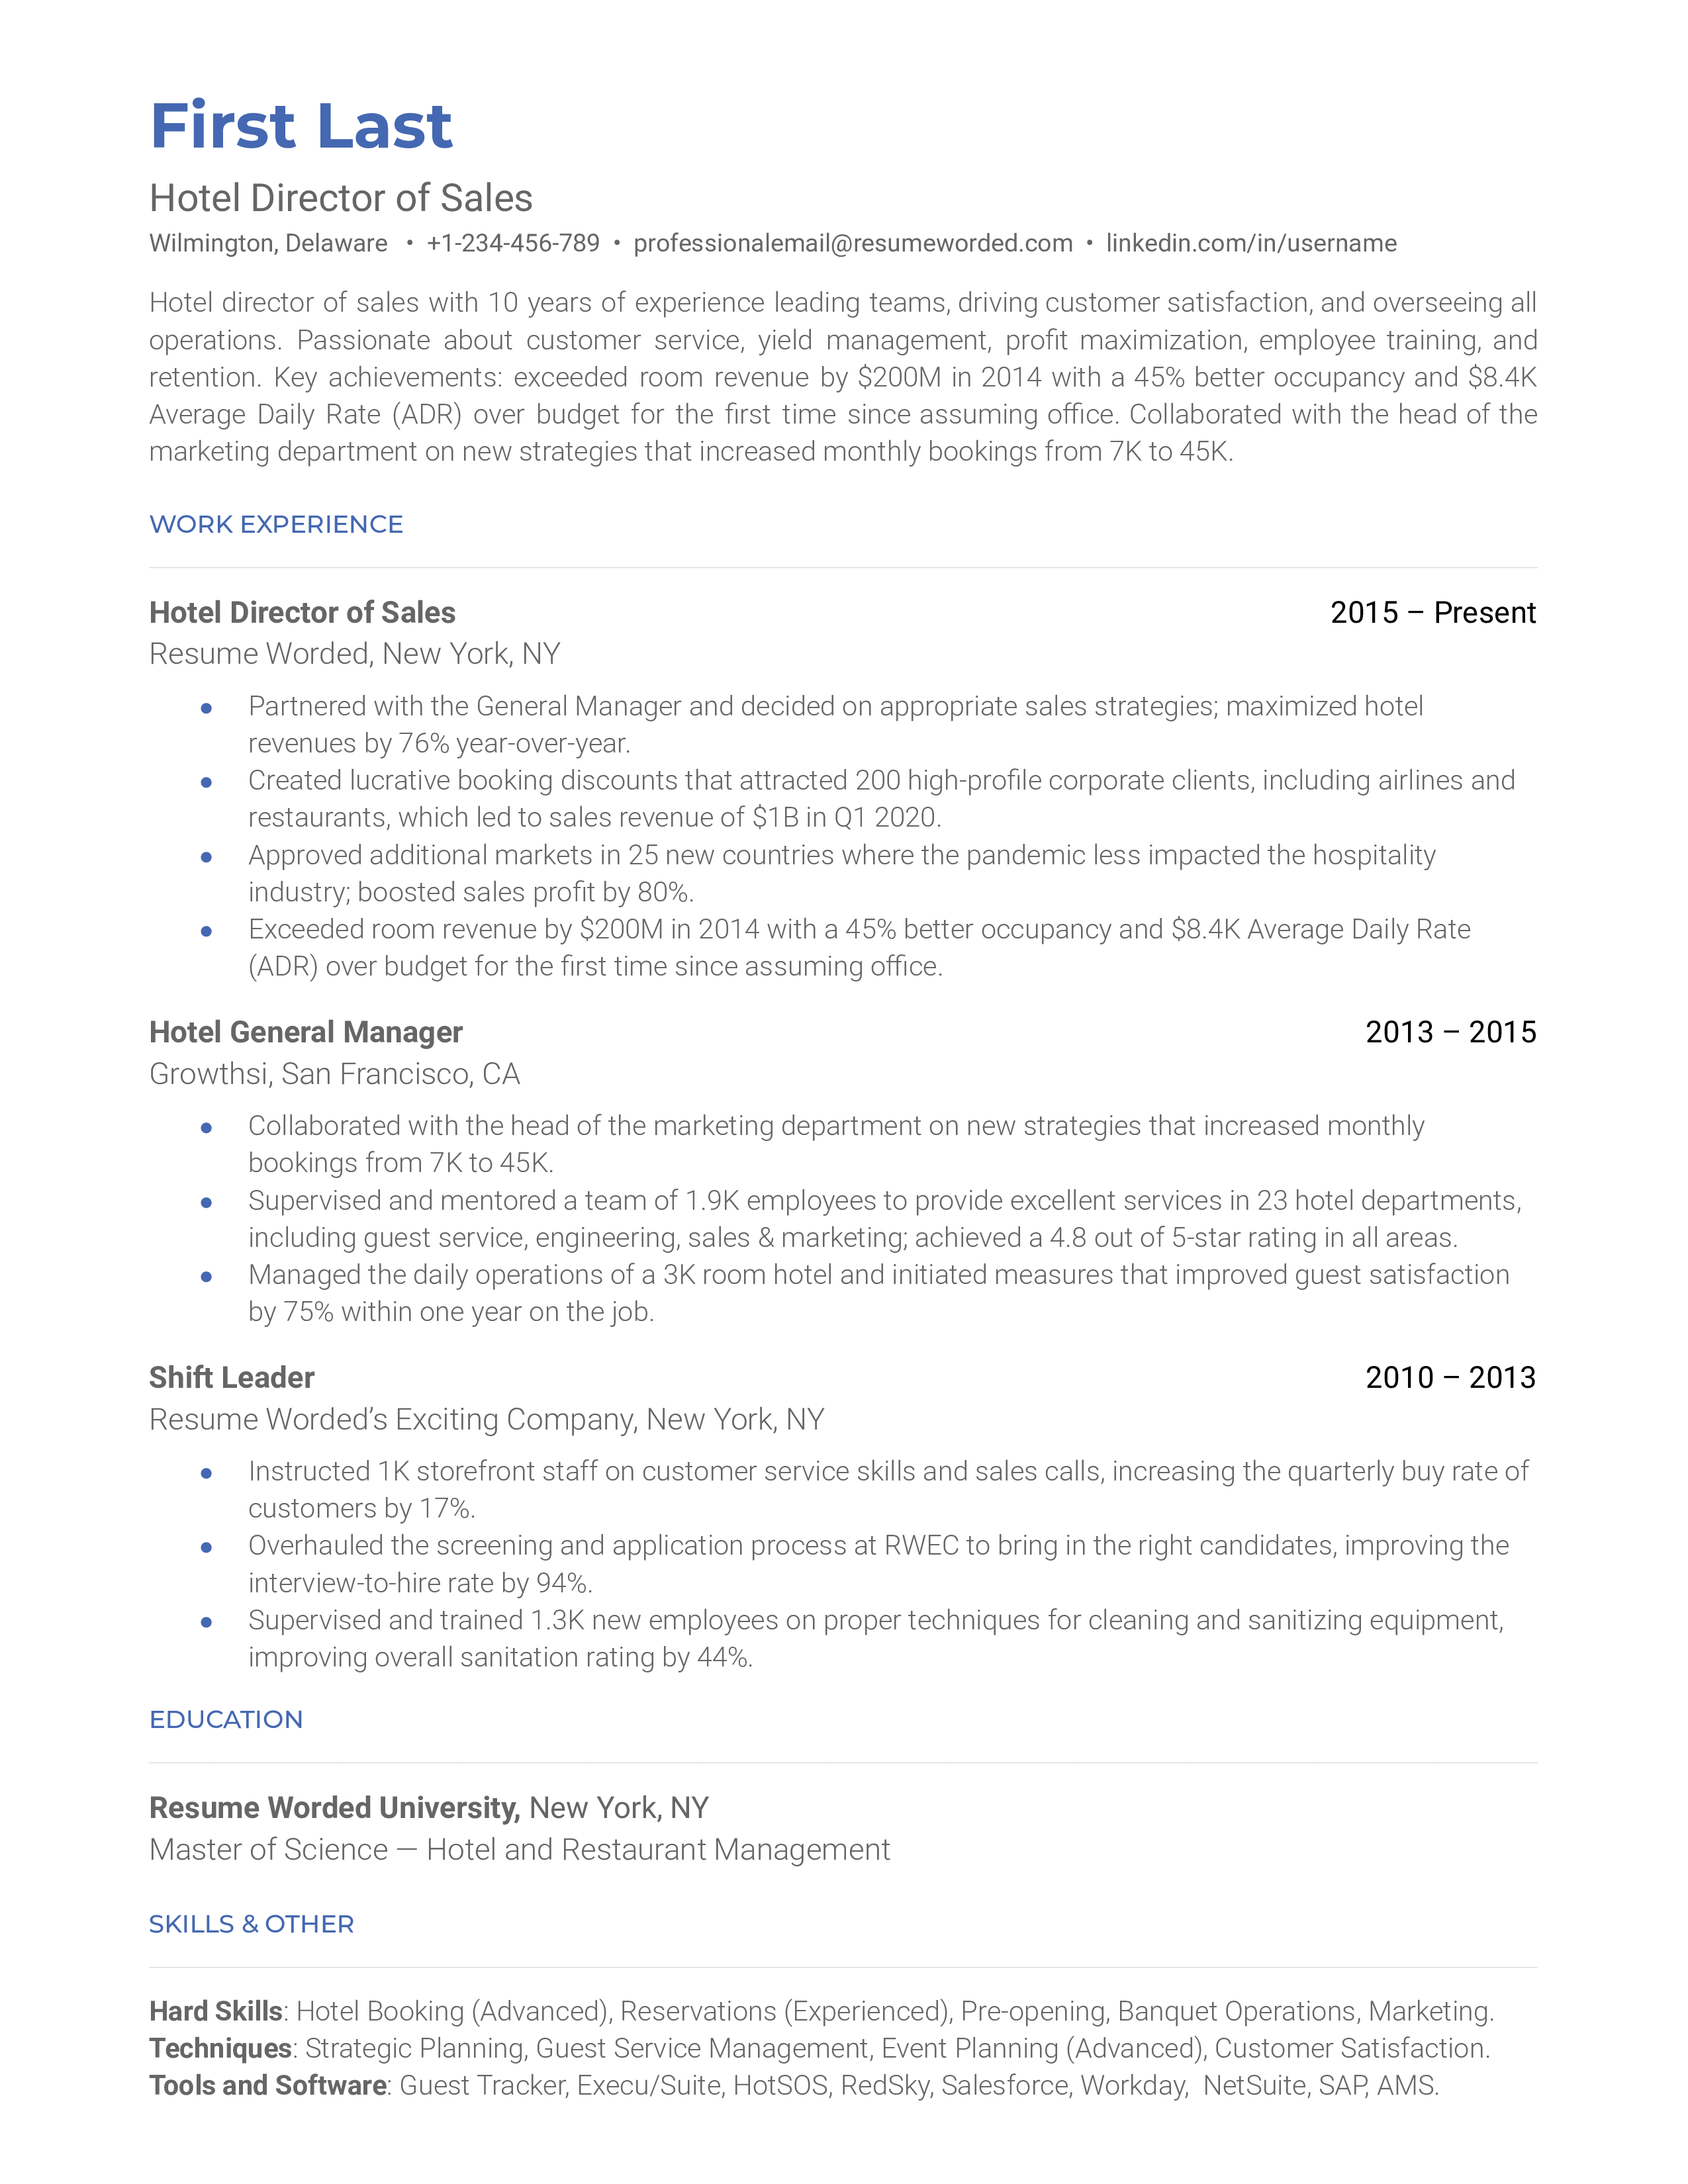 A CV for a Hotel Director of Sales showcasing numerical results and crisis management skills.